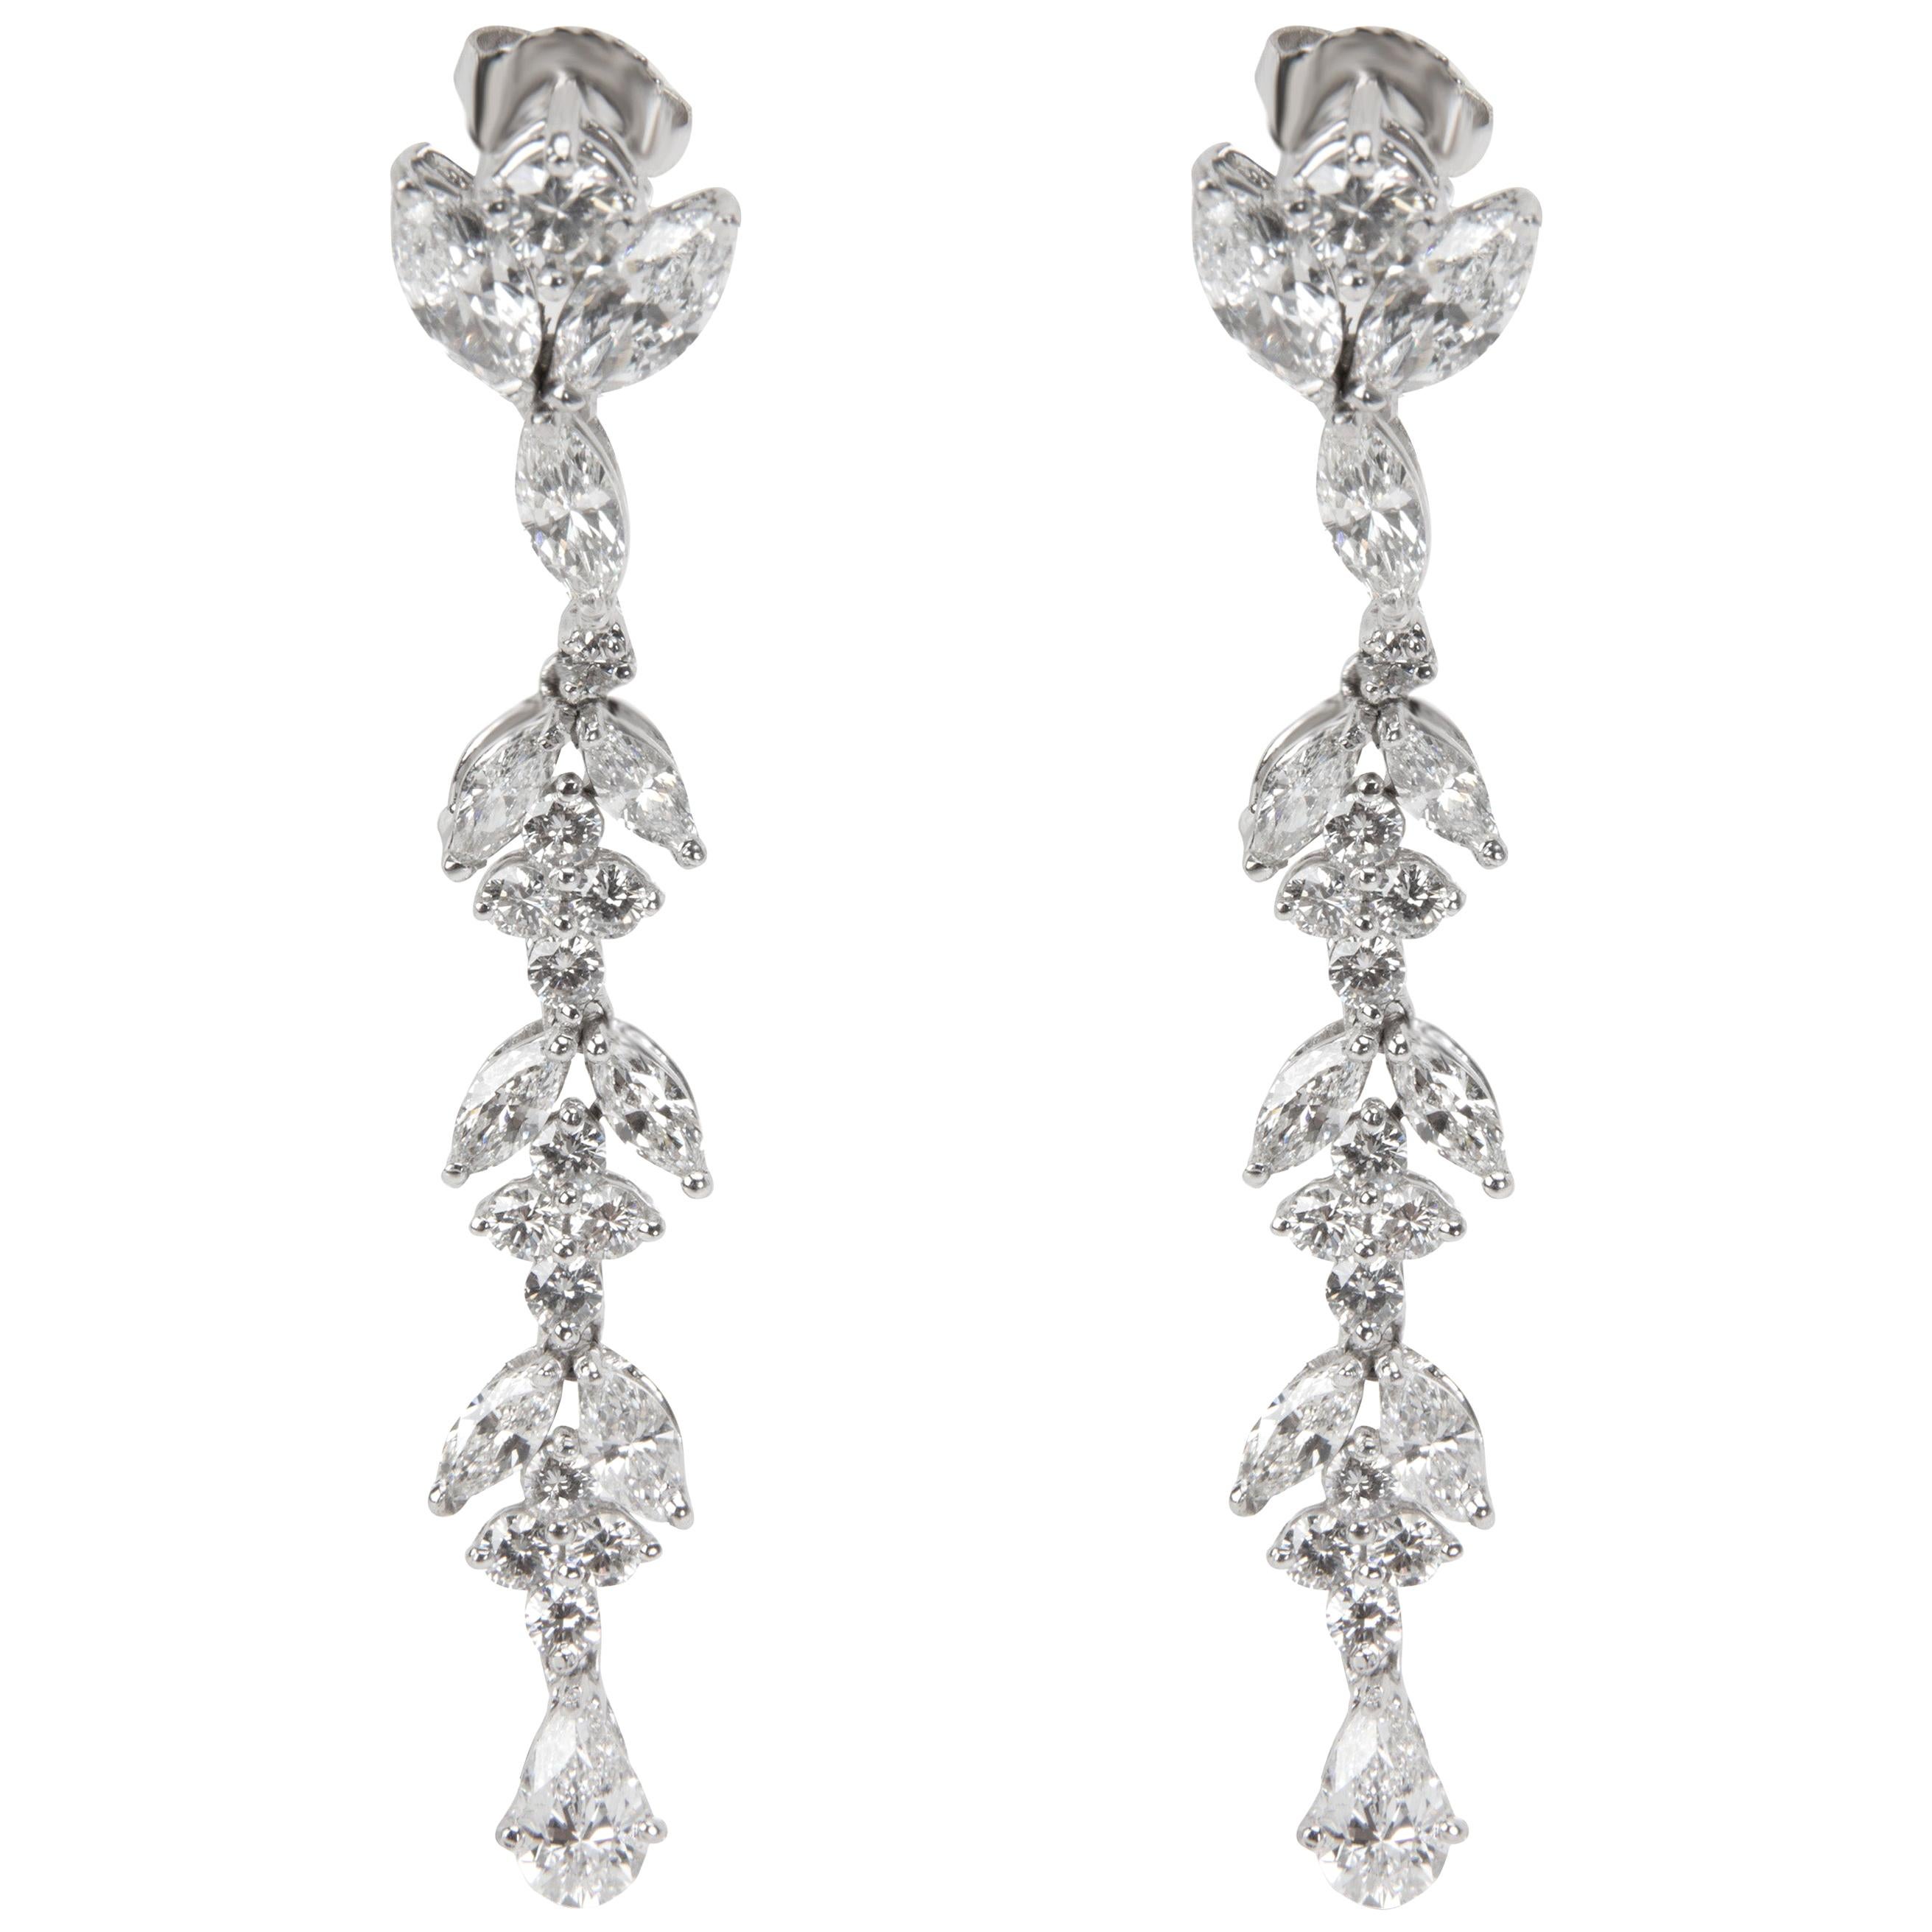 Marquise, Pear and Round Diamond Drop Earrings in Platinum '4.64 Carat'